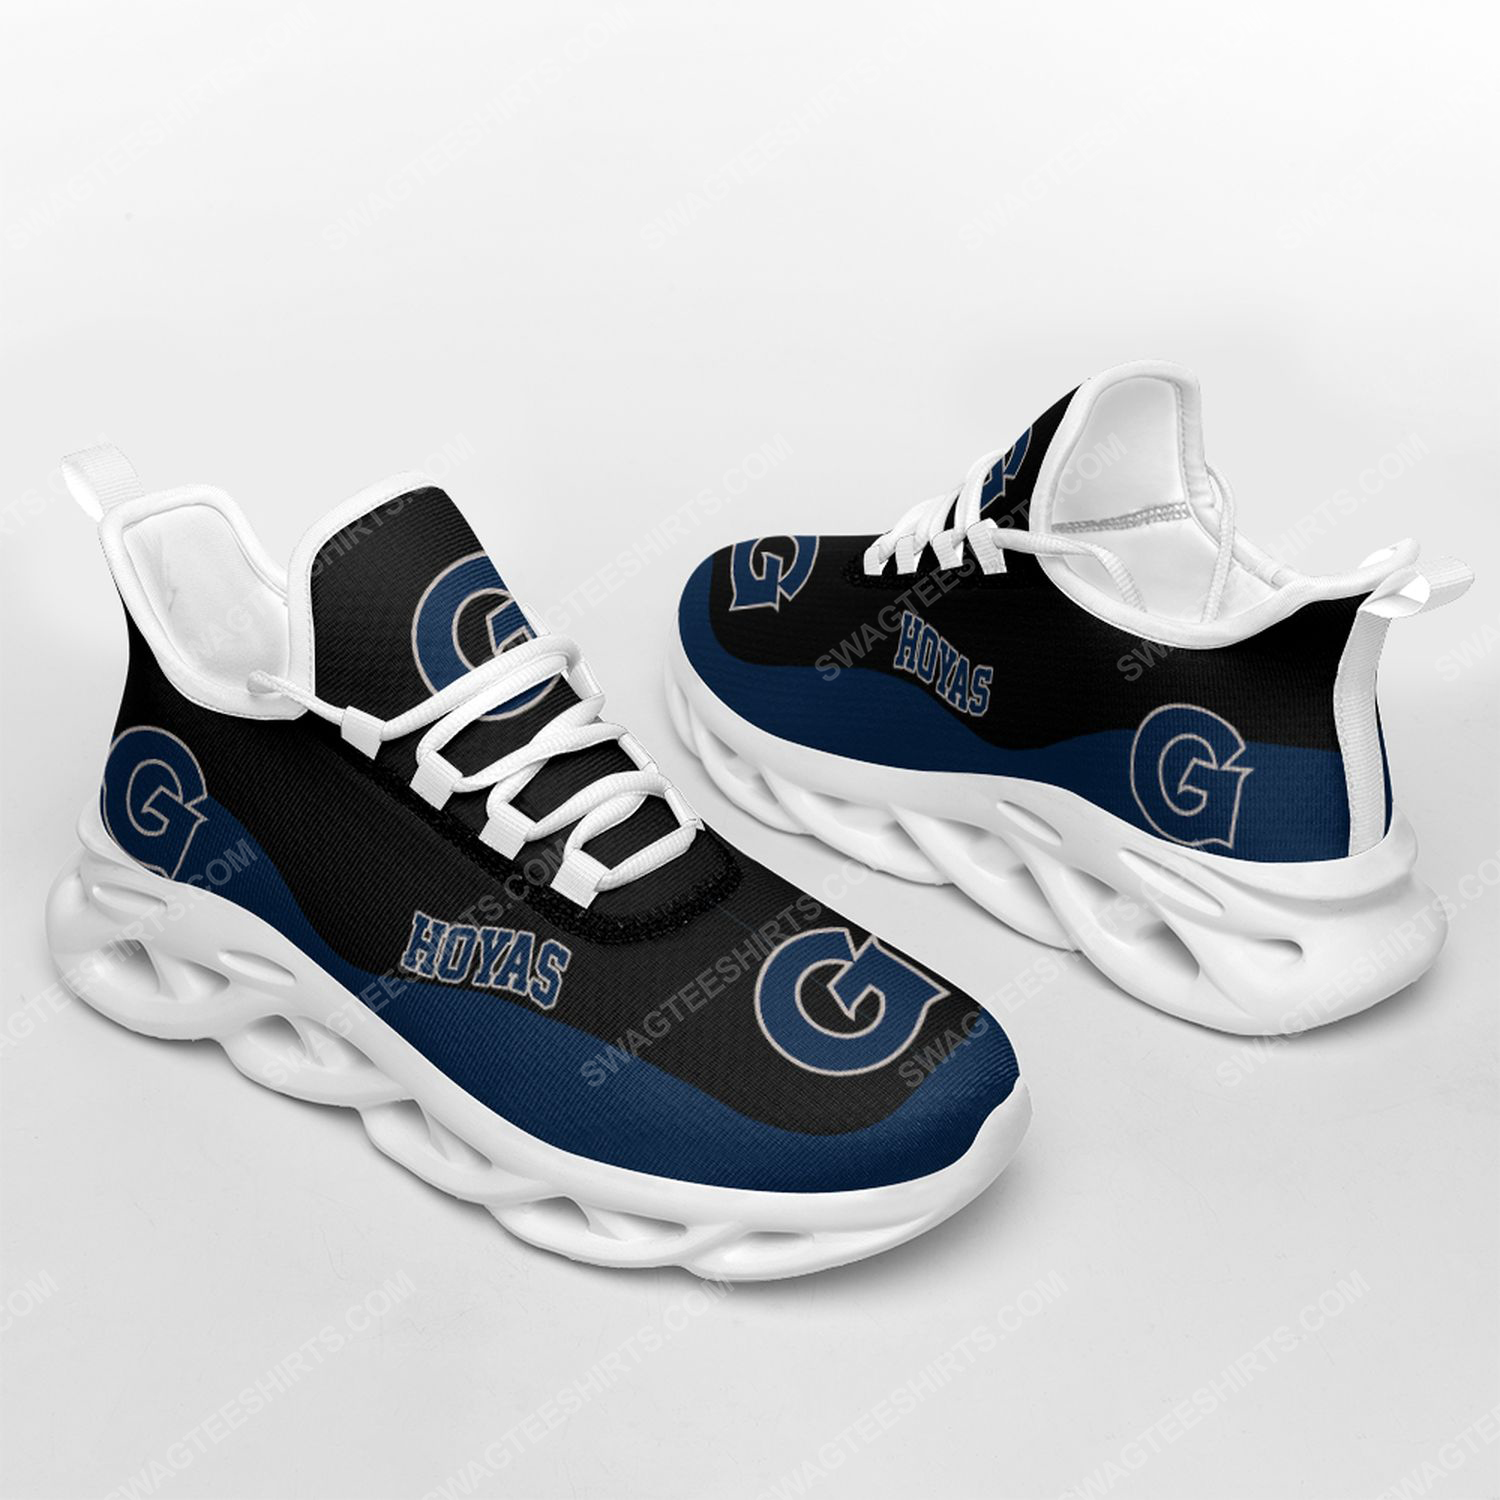 [special edition] The georgetown hoyas football team max soul shoes – Maria